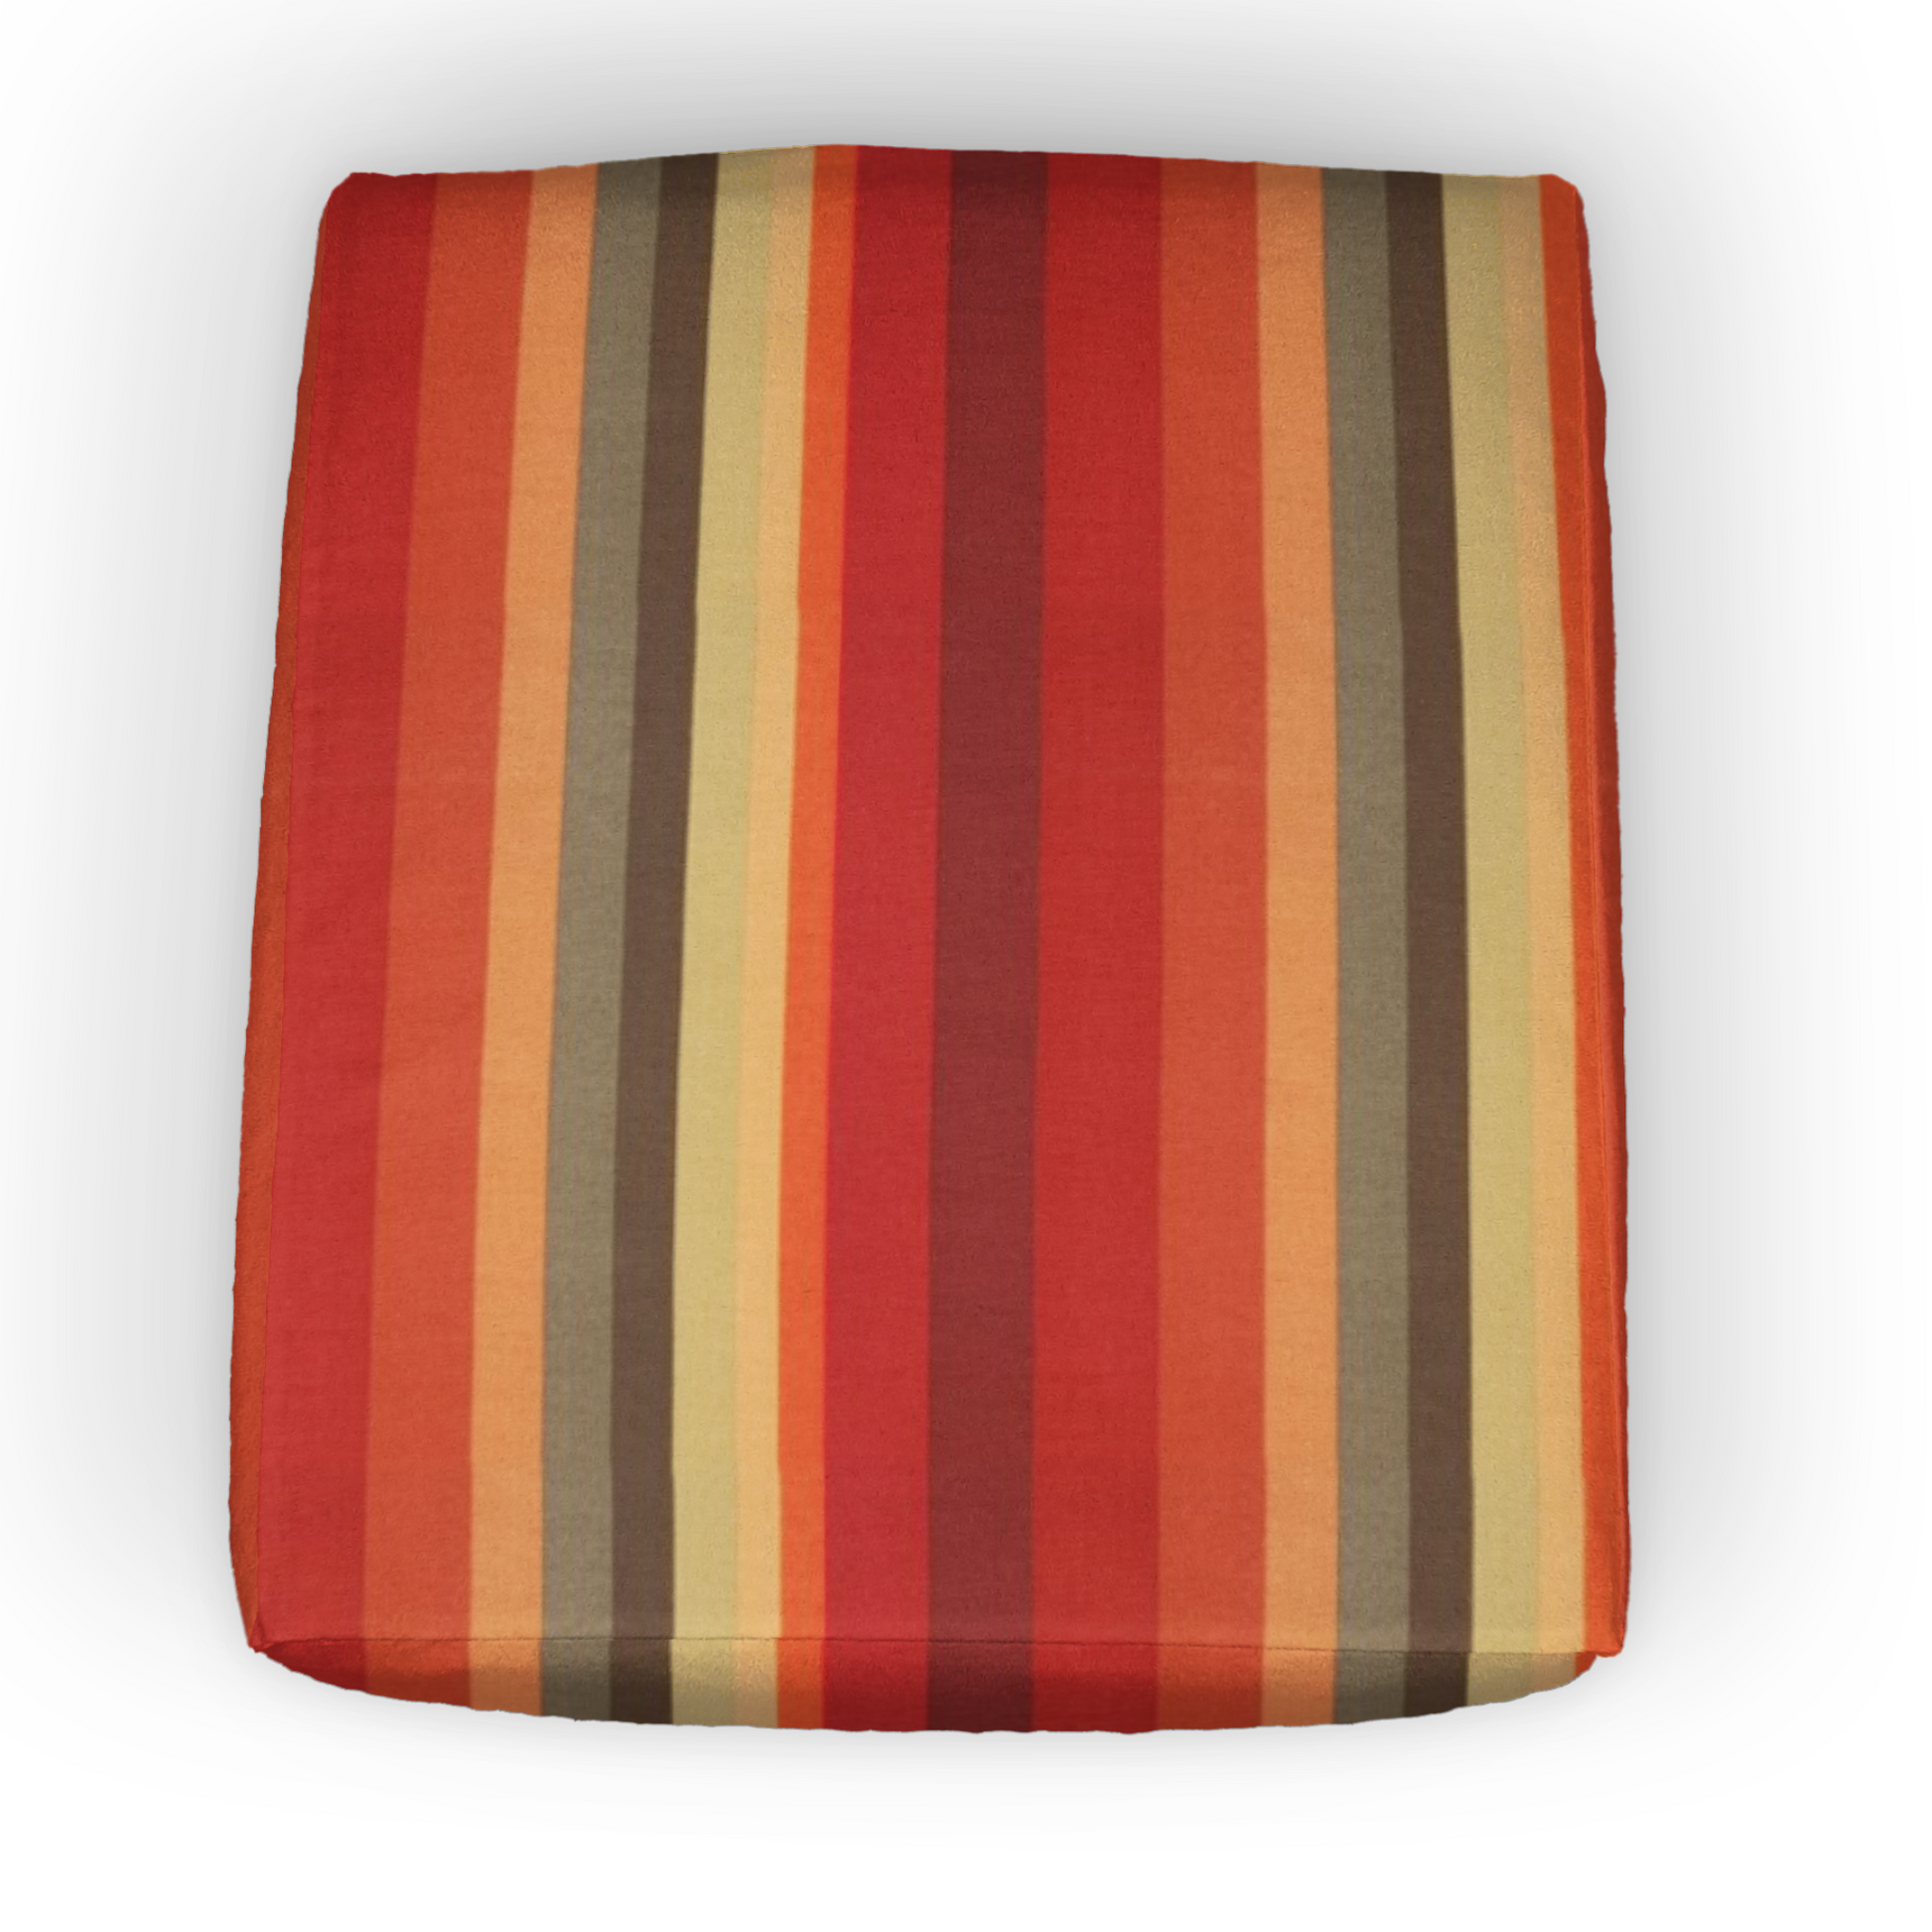 Custom Water Resistant Elastic Fitted & Protective Cushion Cover - Summer Islip Stripes